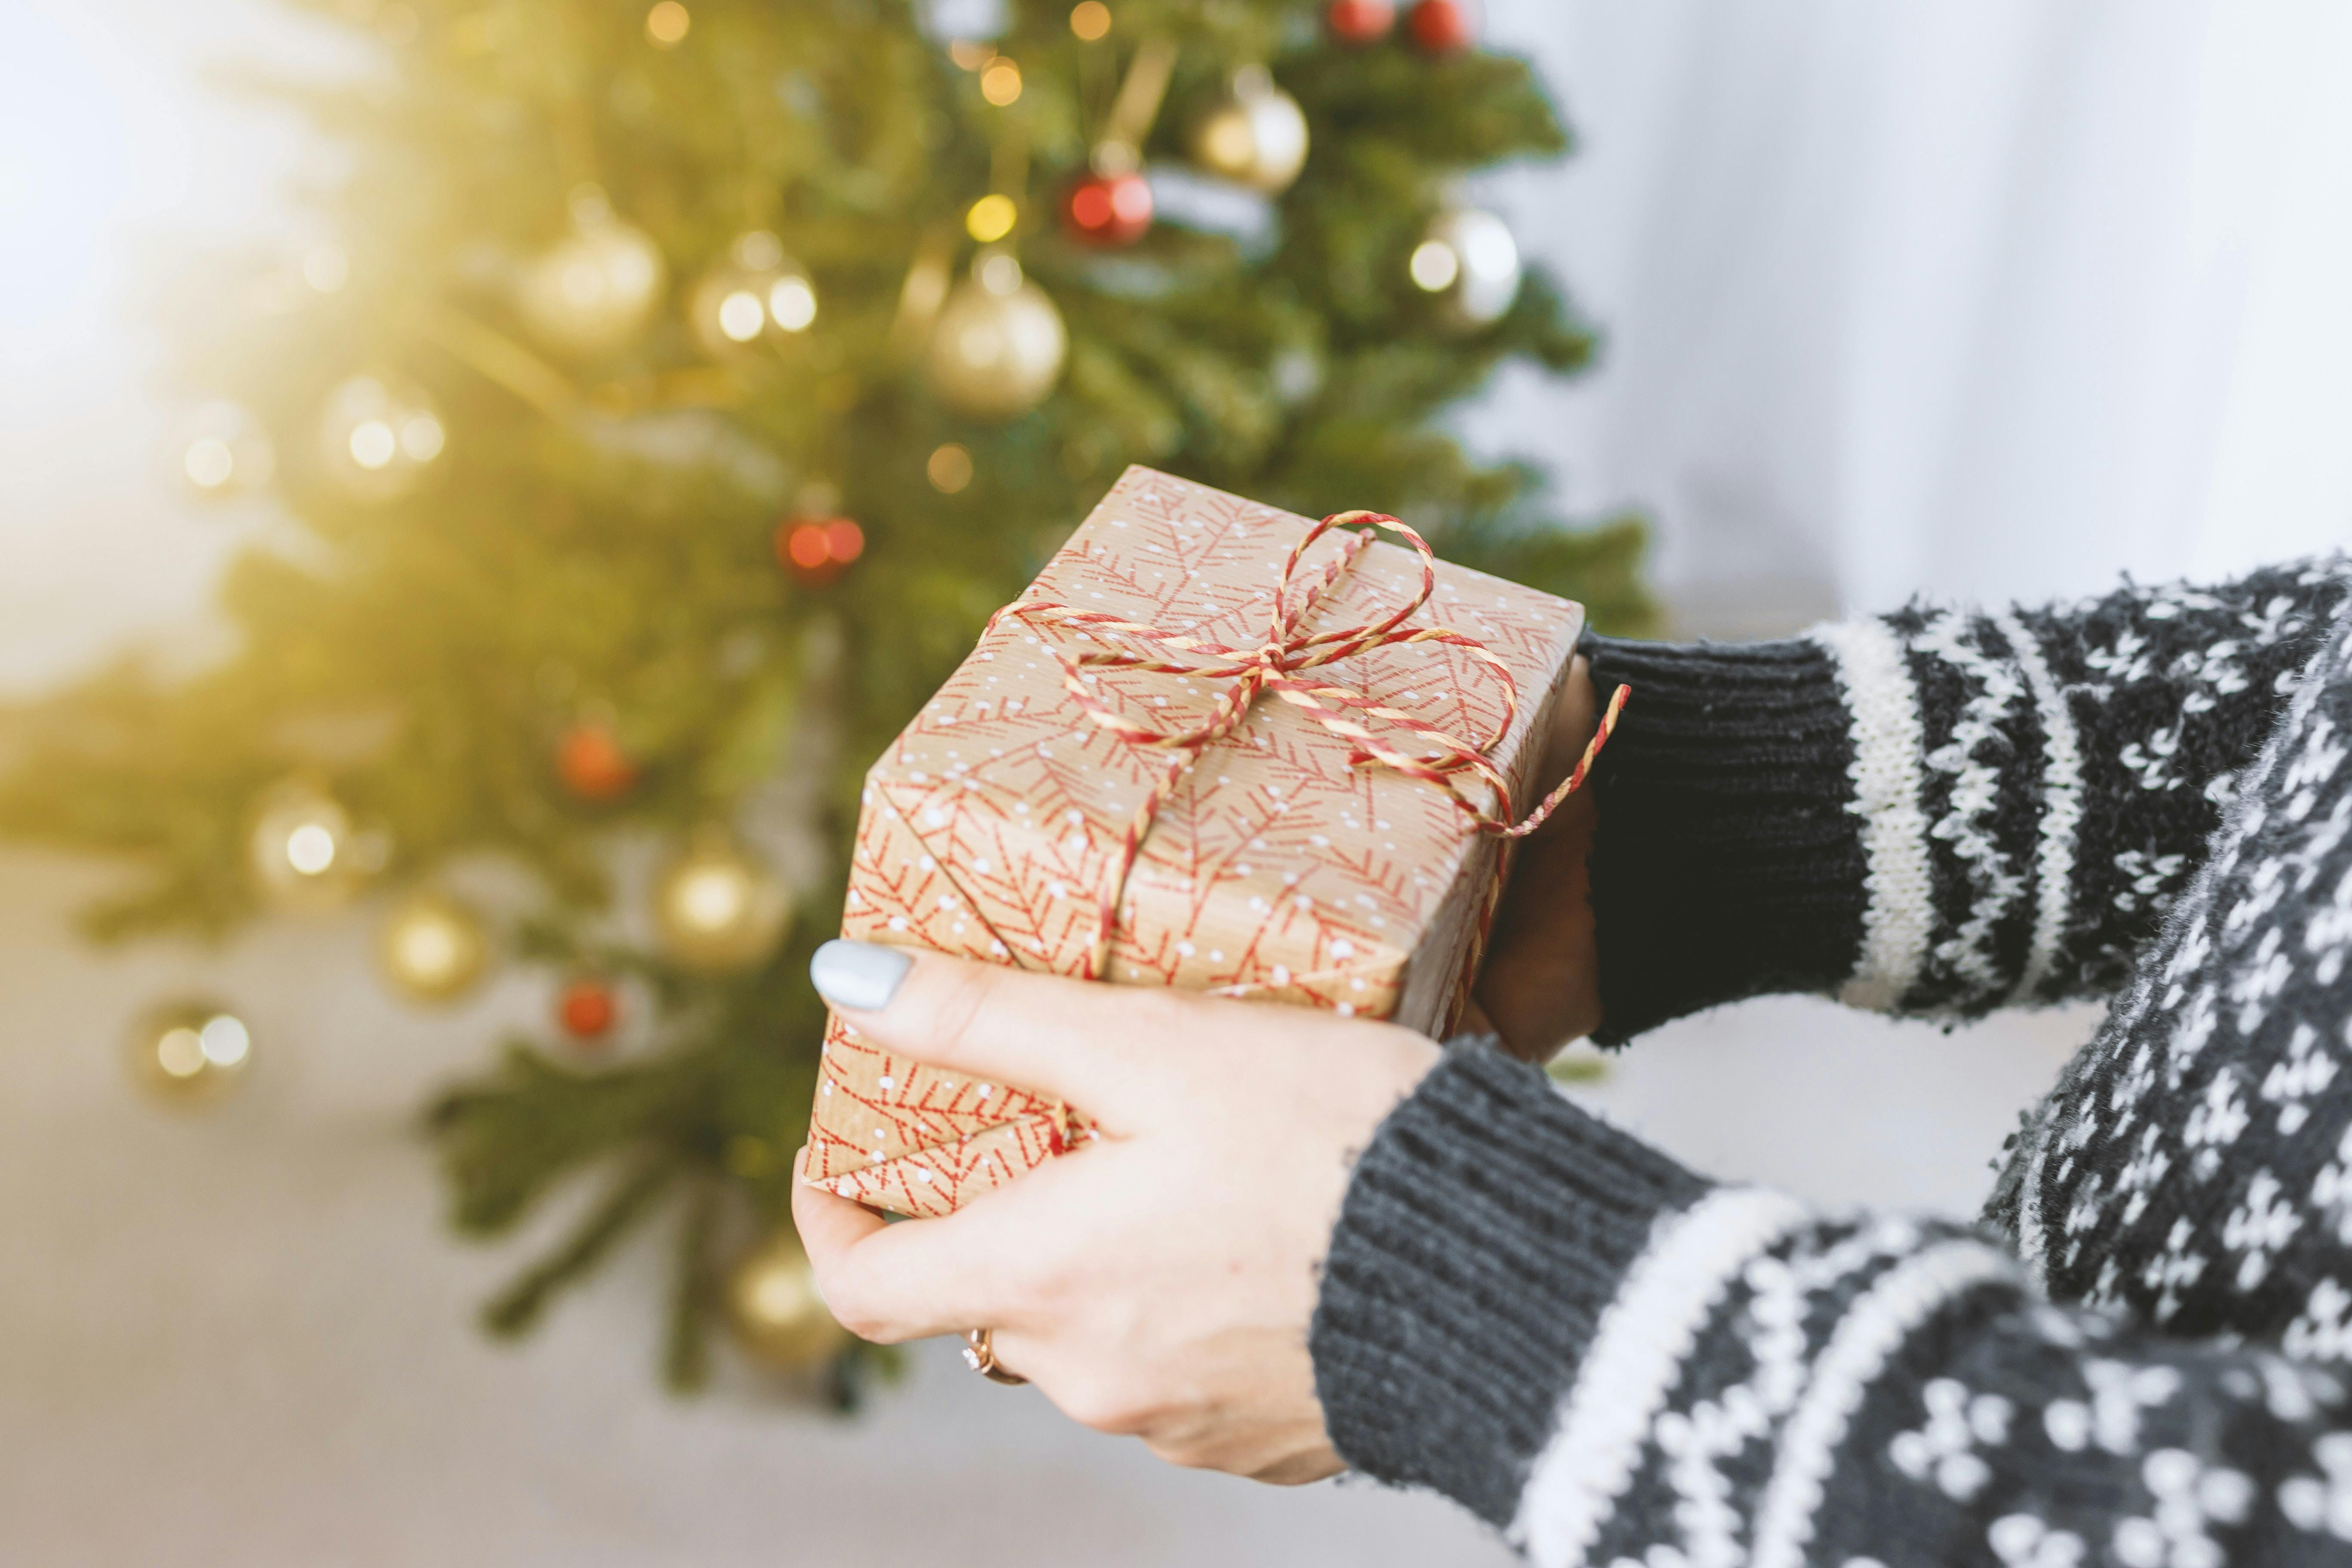 How to give gifts better